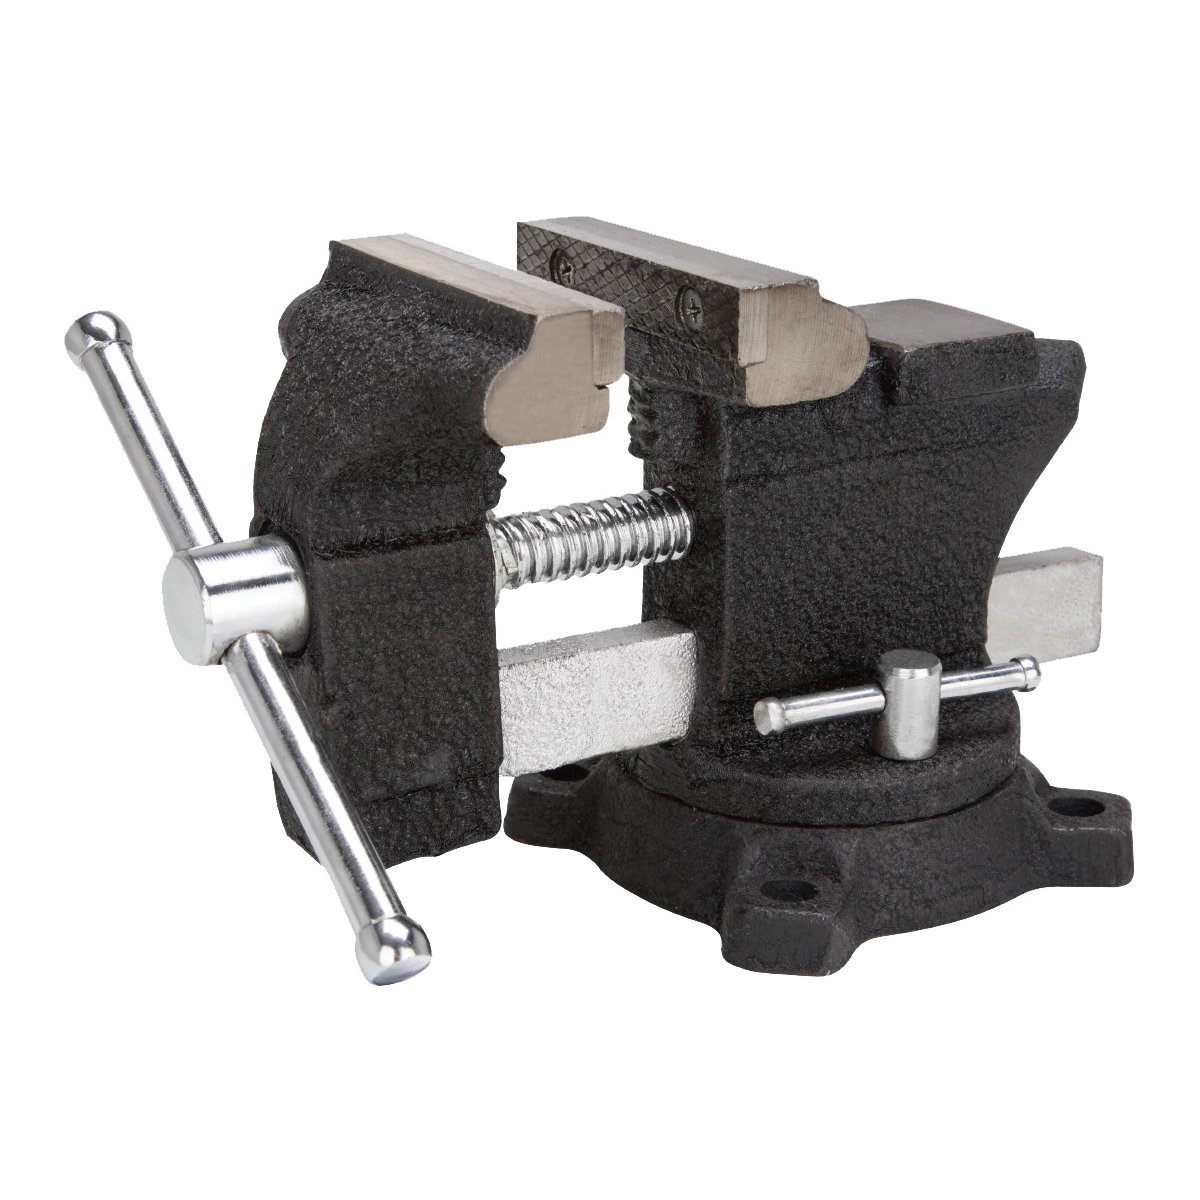 JLO-067 Bench Vise, 3-1/2 in Jaw Opening, 1/4 in W Jaw, 2 in D Throat, Cast Iron Steel, Serrated Jaw